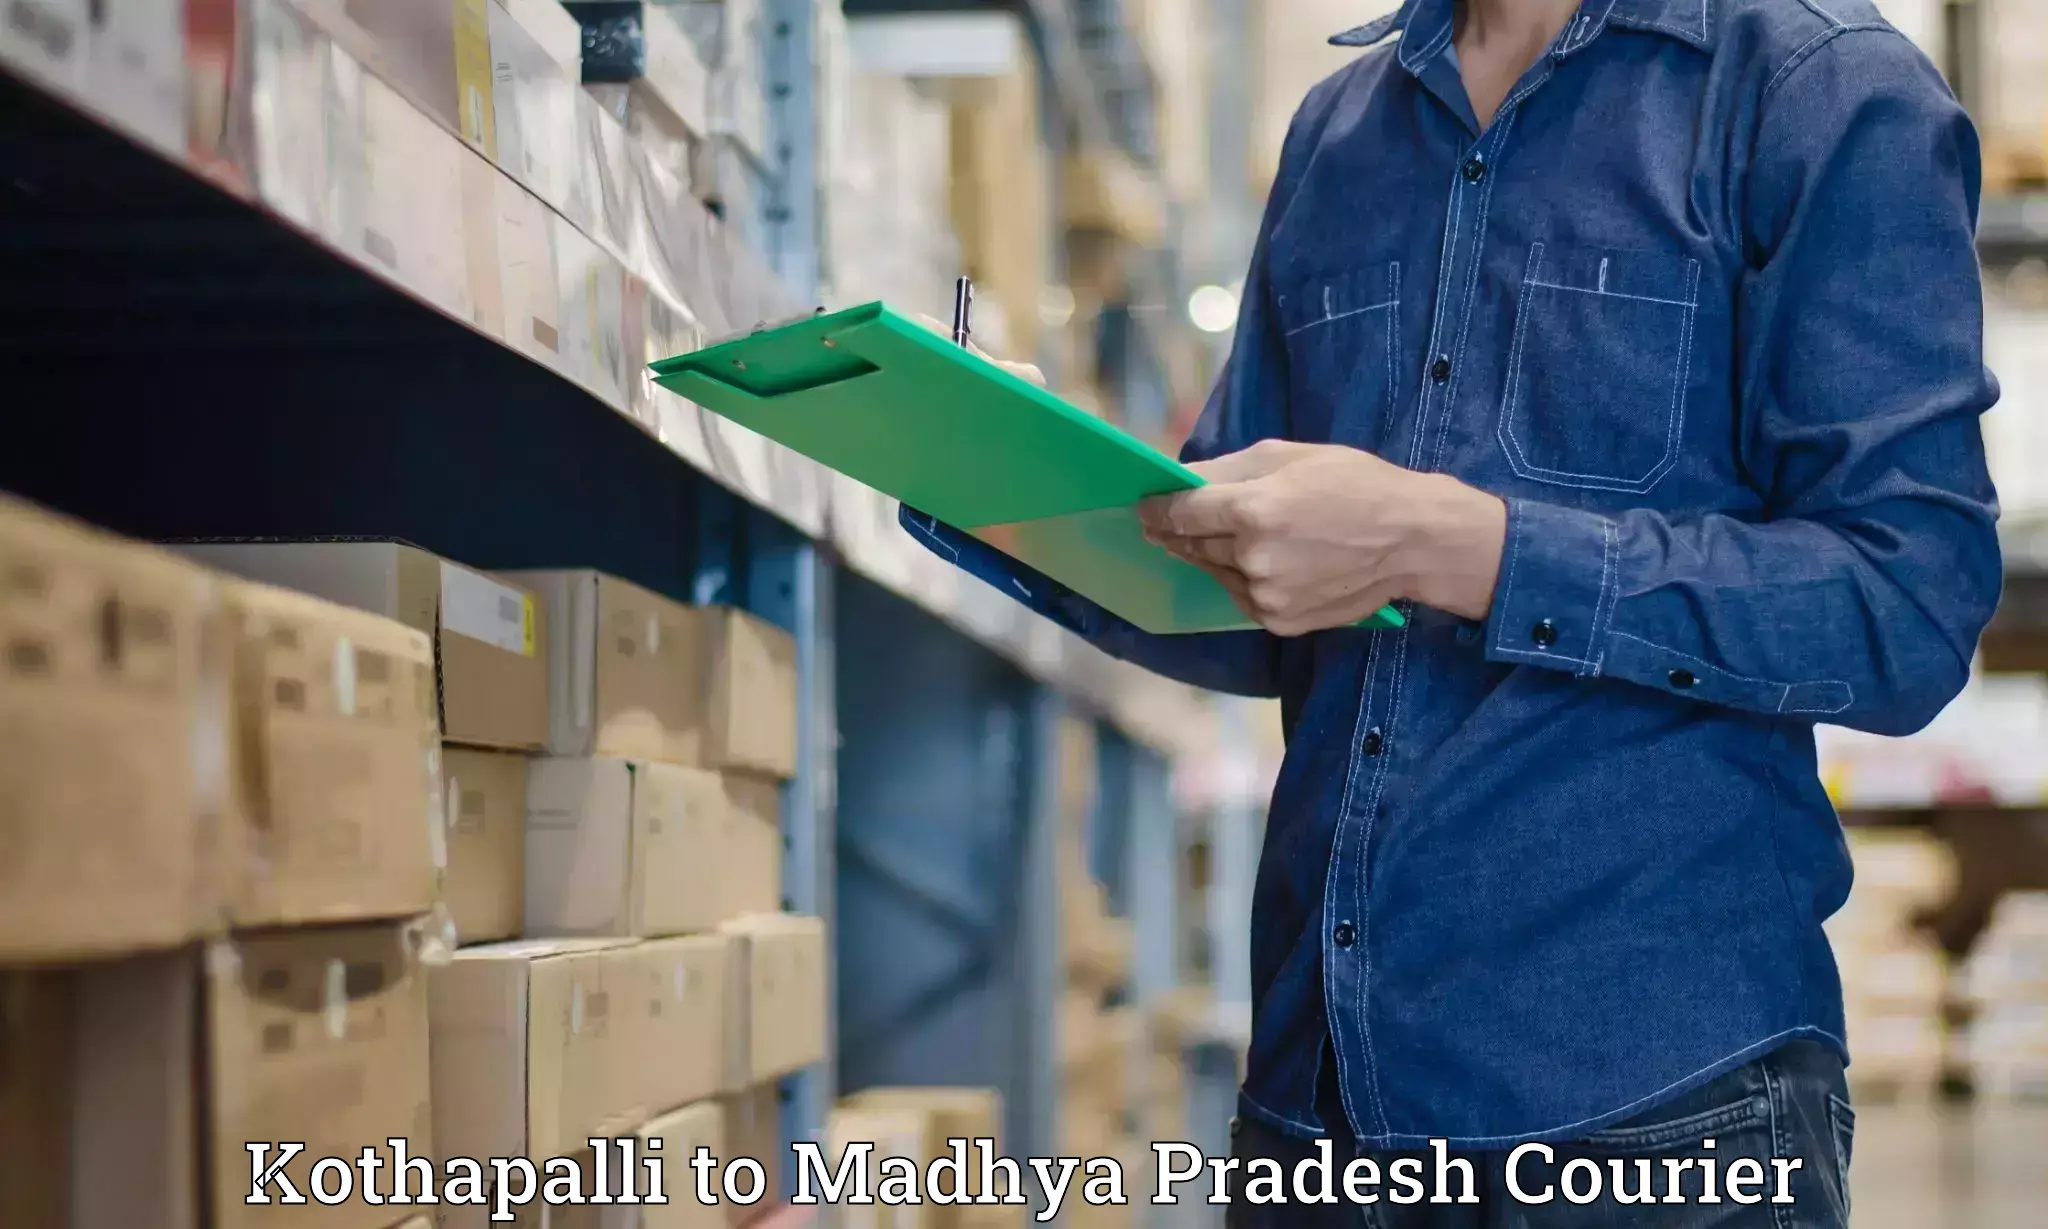 Courier service innovation in Kothapalli to Lakhnadon